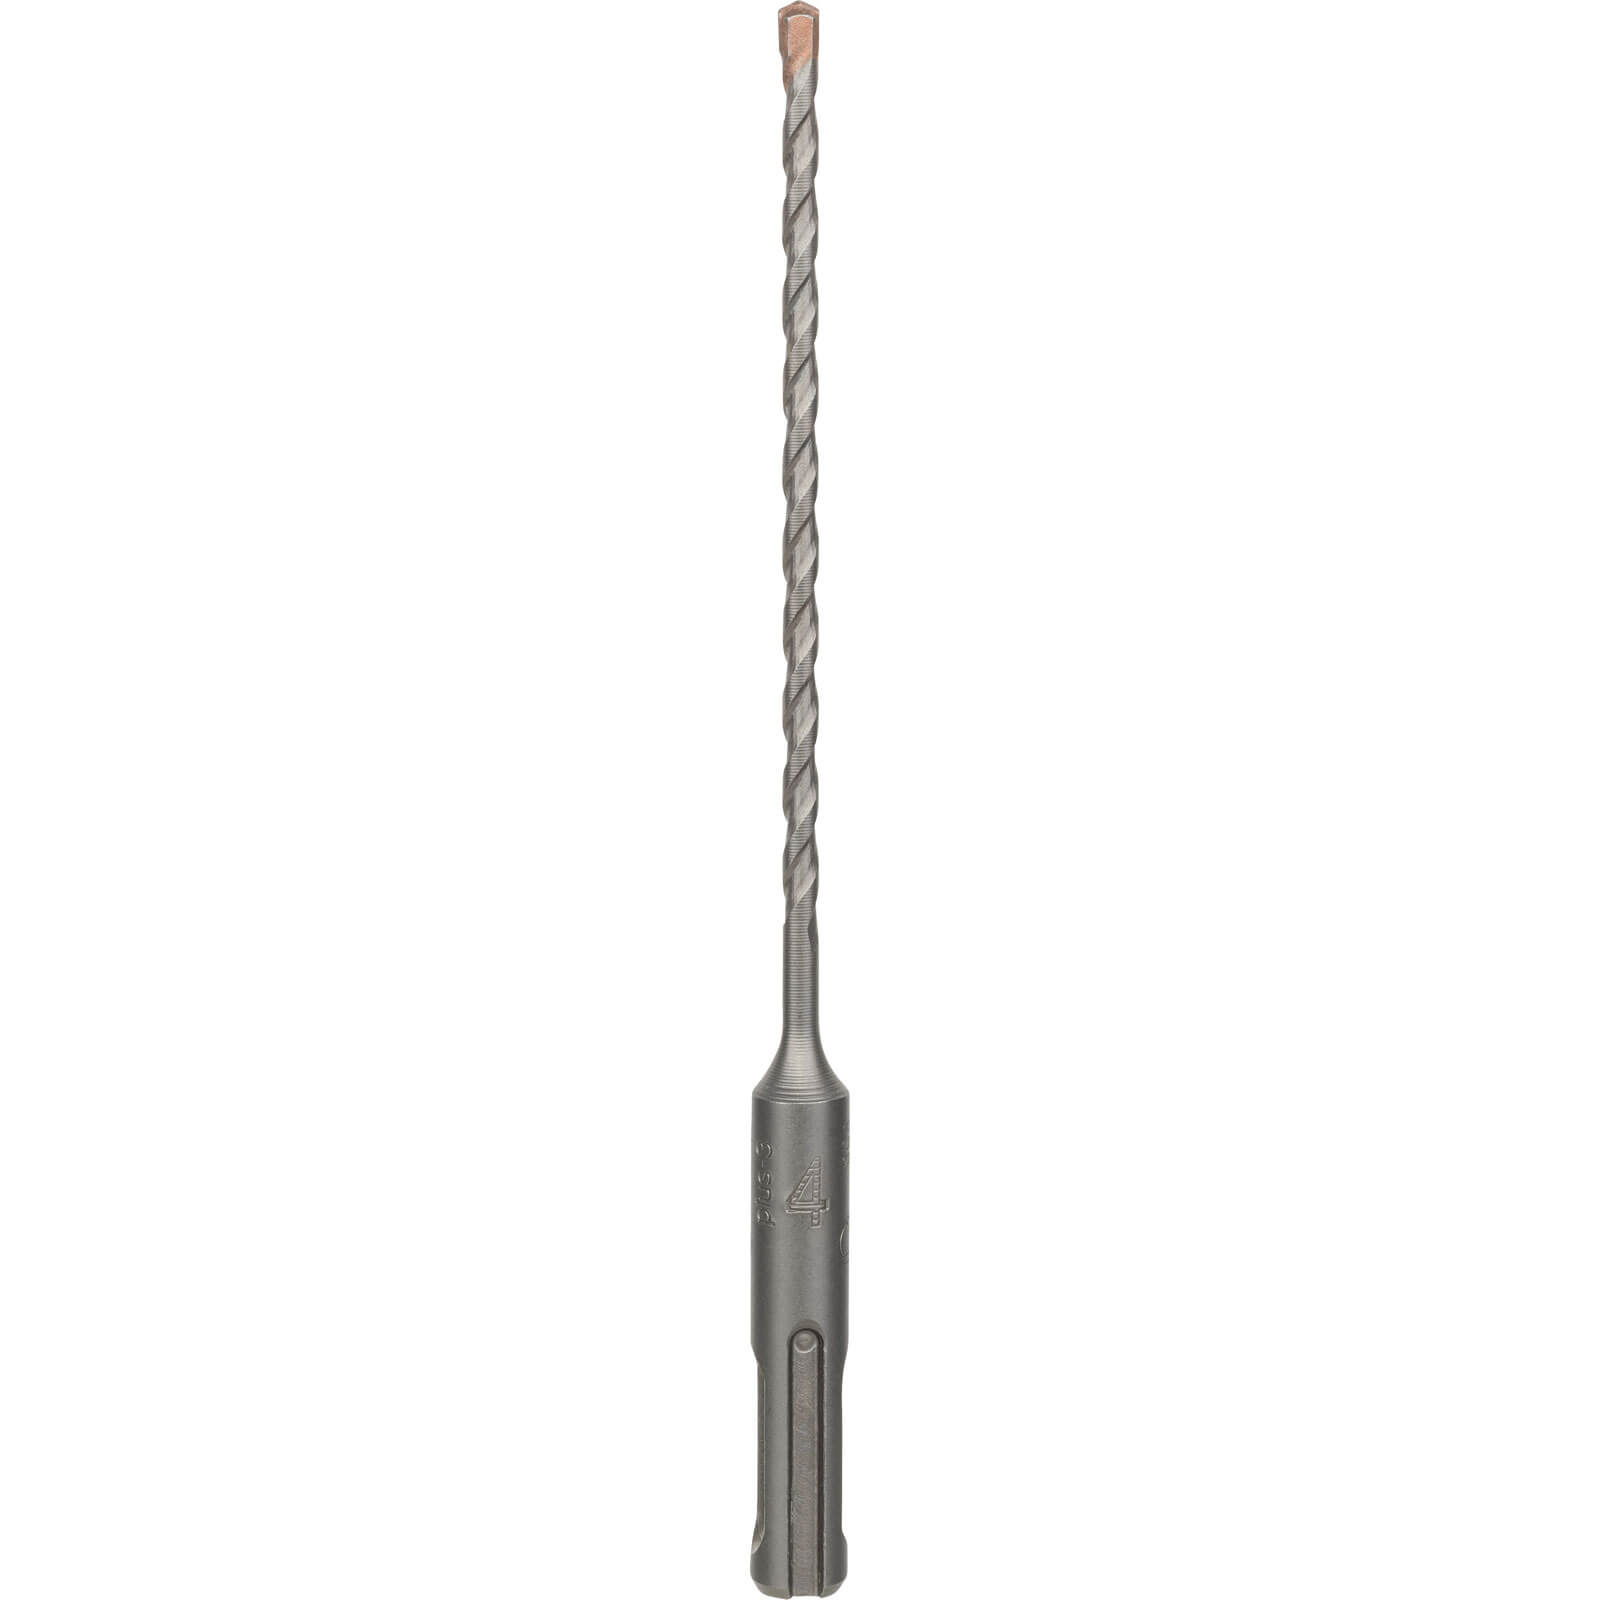 Image of Bosch Series 3 SDS Plus Masonry Drill Bit 4mm 160mm Pack of 1